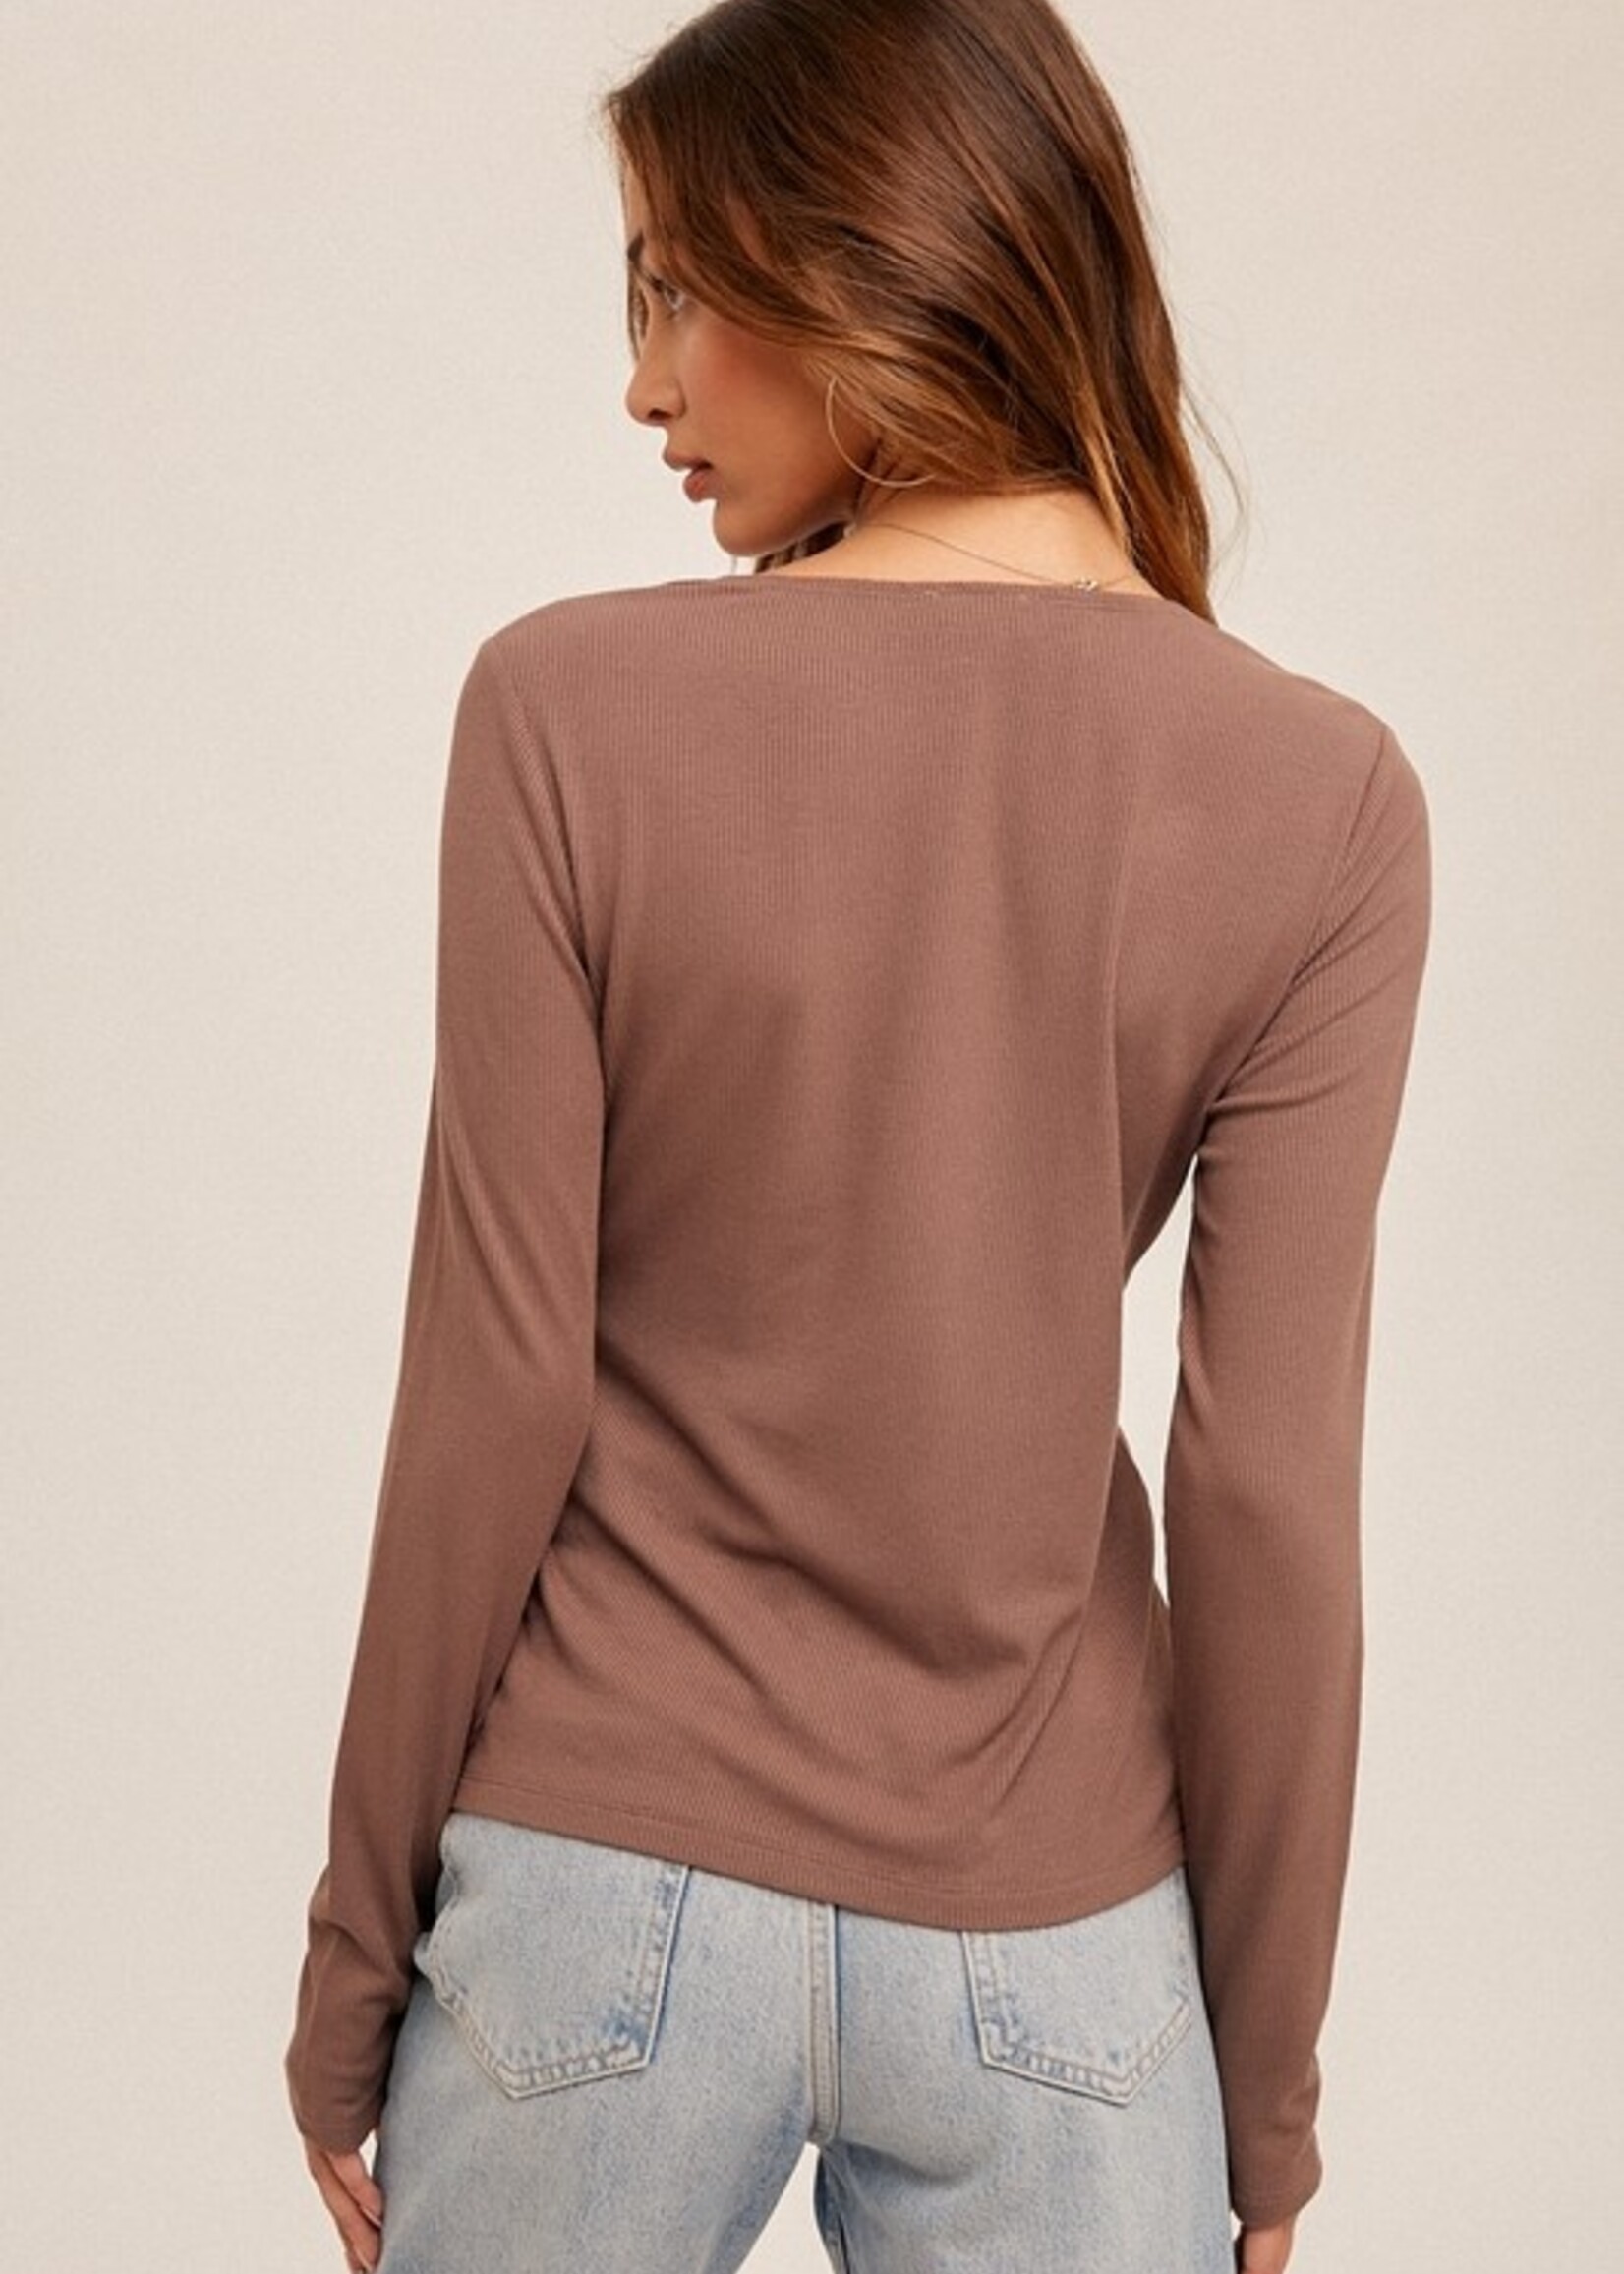 Knot front top